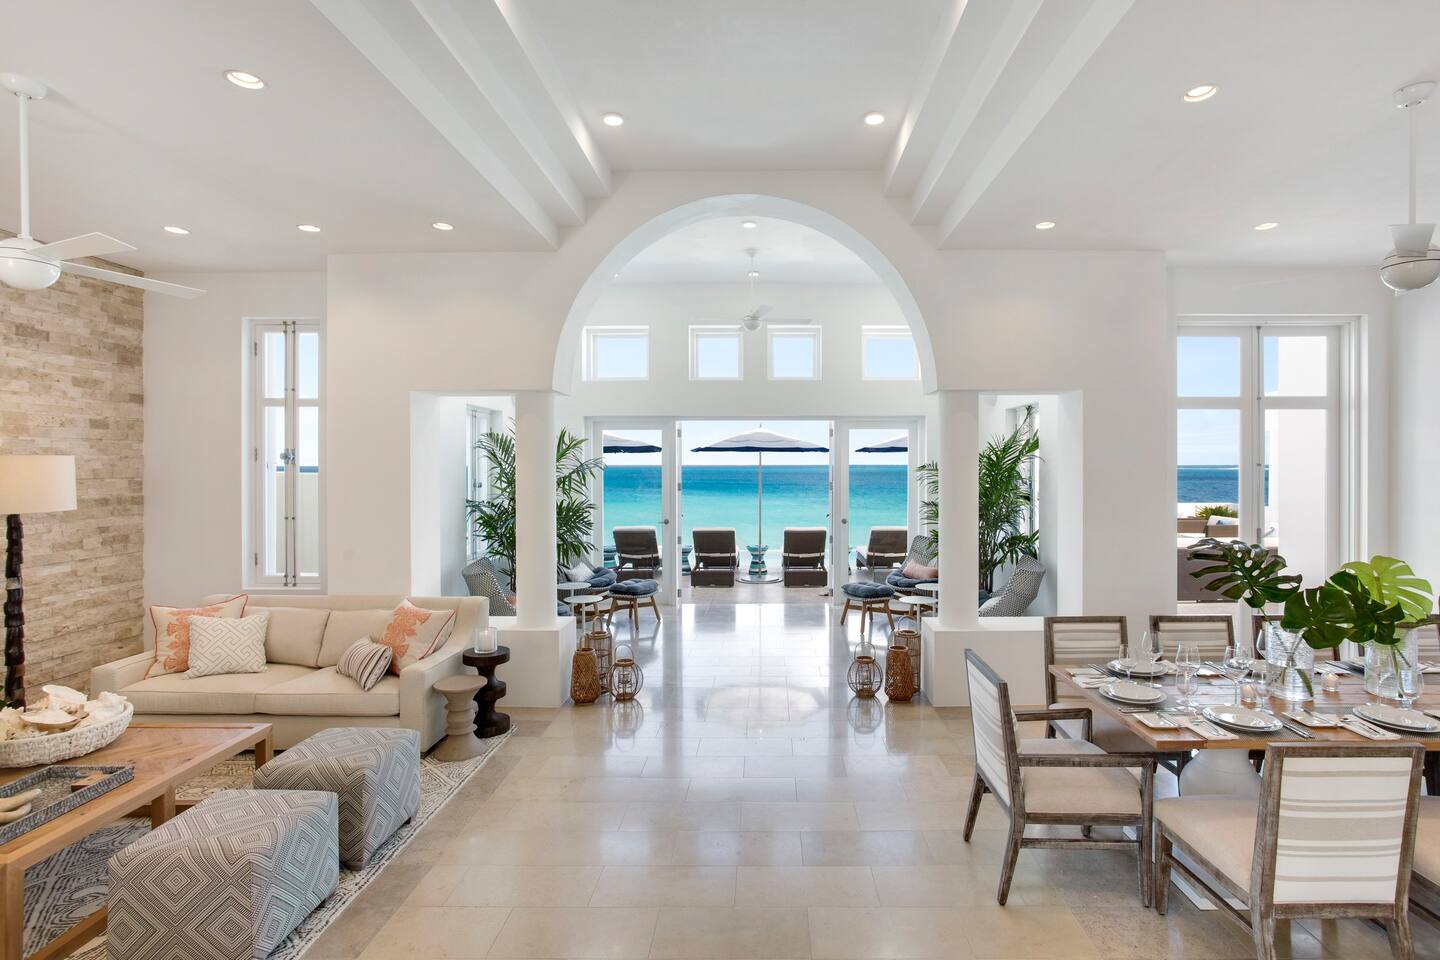 Inside the villa, the living area and dining area are elegantly furnished, offering a seamless blend of indoor comfort and breathtaking beach views.

